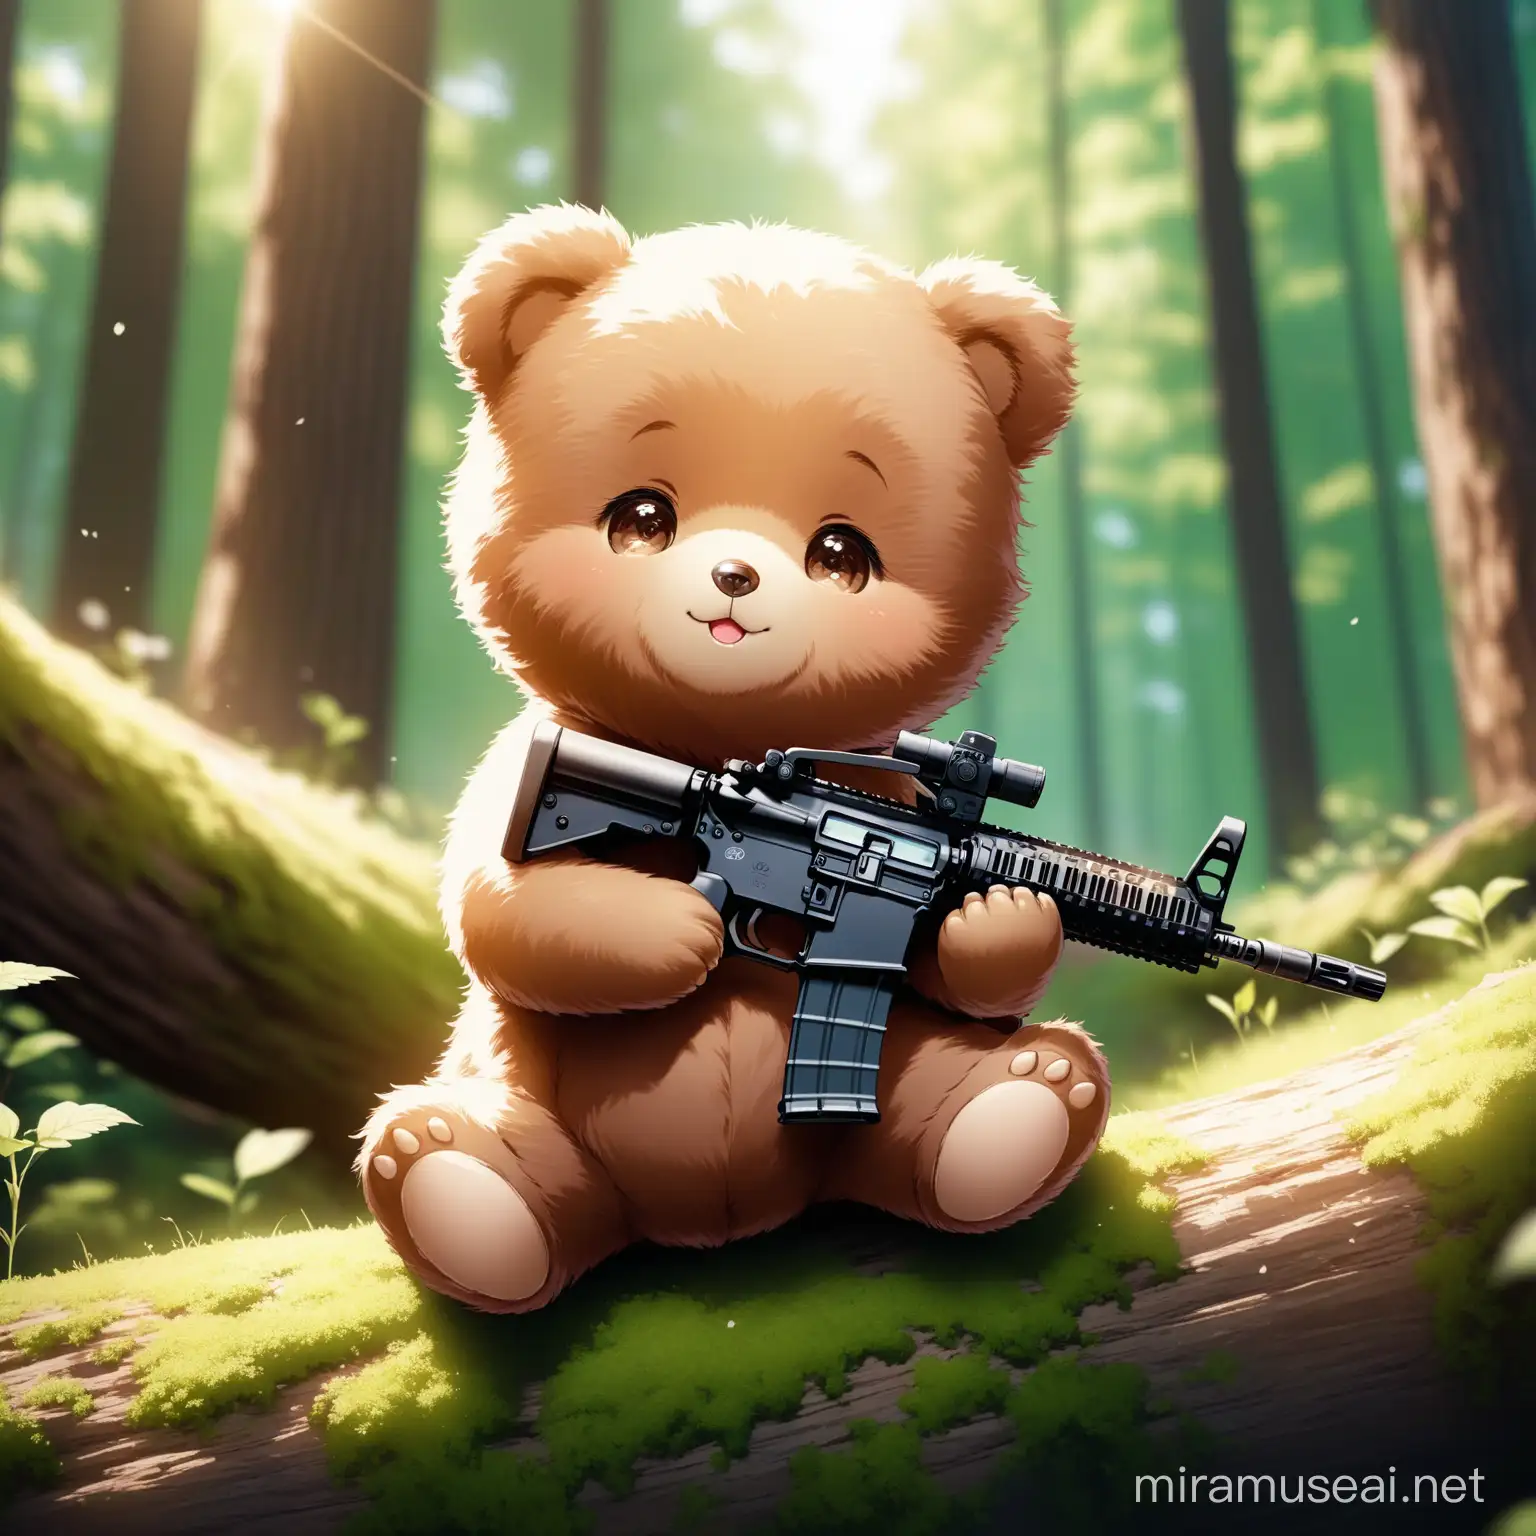 imagine adorably cute baby bear in the forest, makro photography, cinematic –ar 15:10